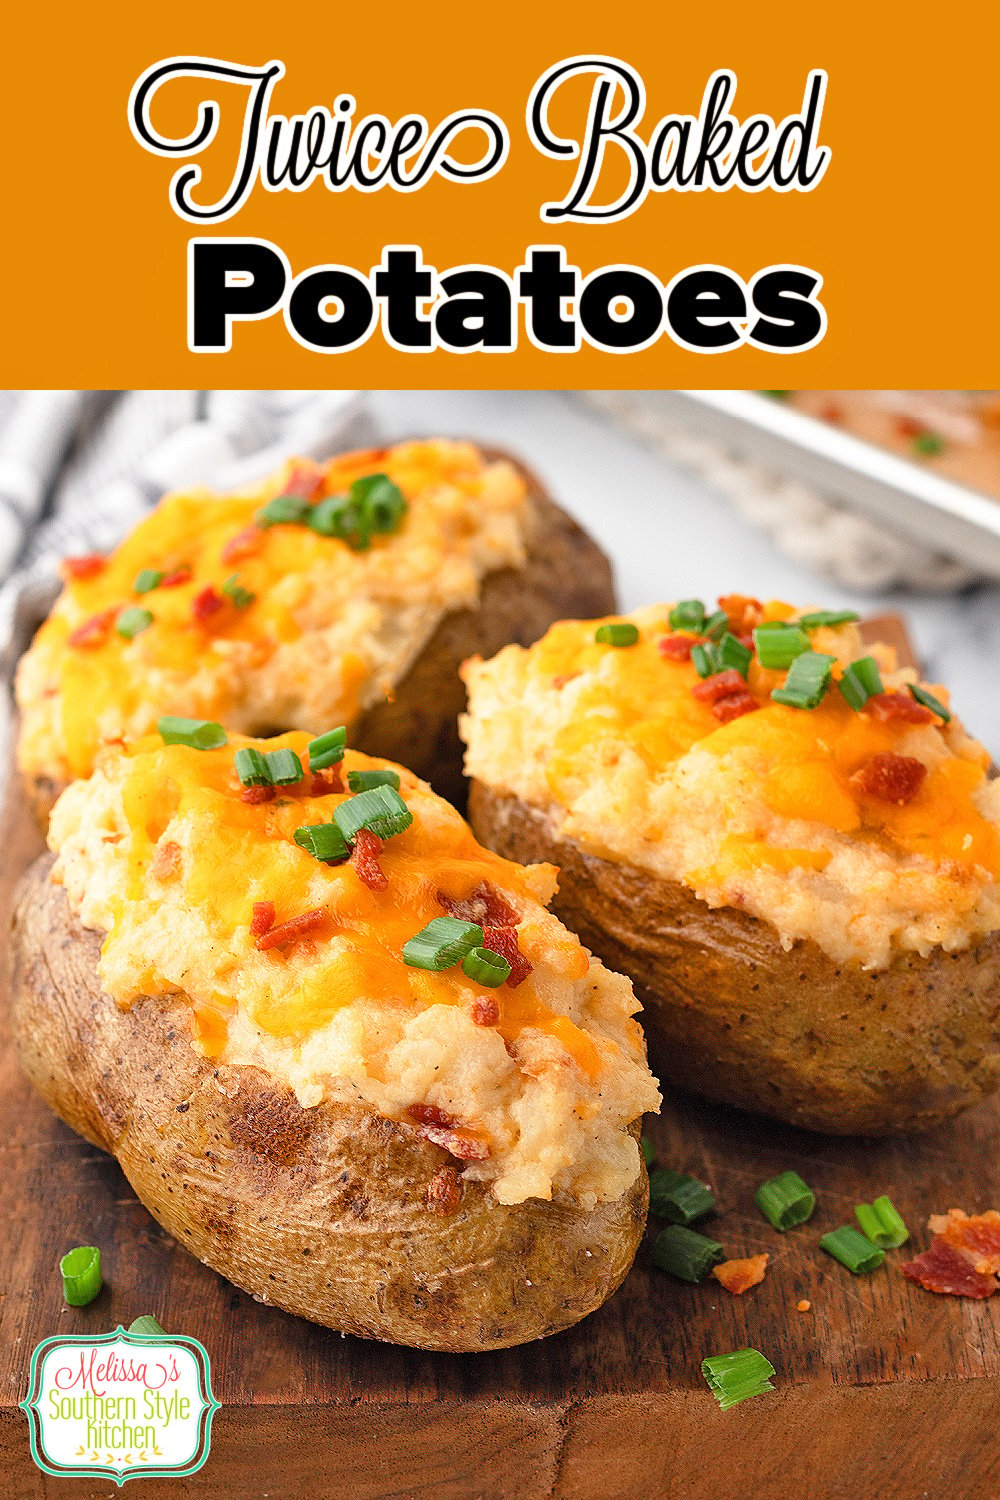 This Twice Baked Potatoes recipe features baked potatoes that are perfectly seasoned and filled with cheddar cheese and smoky bacon. #potatoes #twicebakedpotato #potatorecipes #besttwicebakedpotatoes #bakedpotatoes #cheesypotatoes #easypotatorecipes